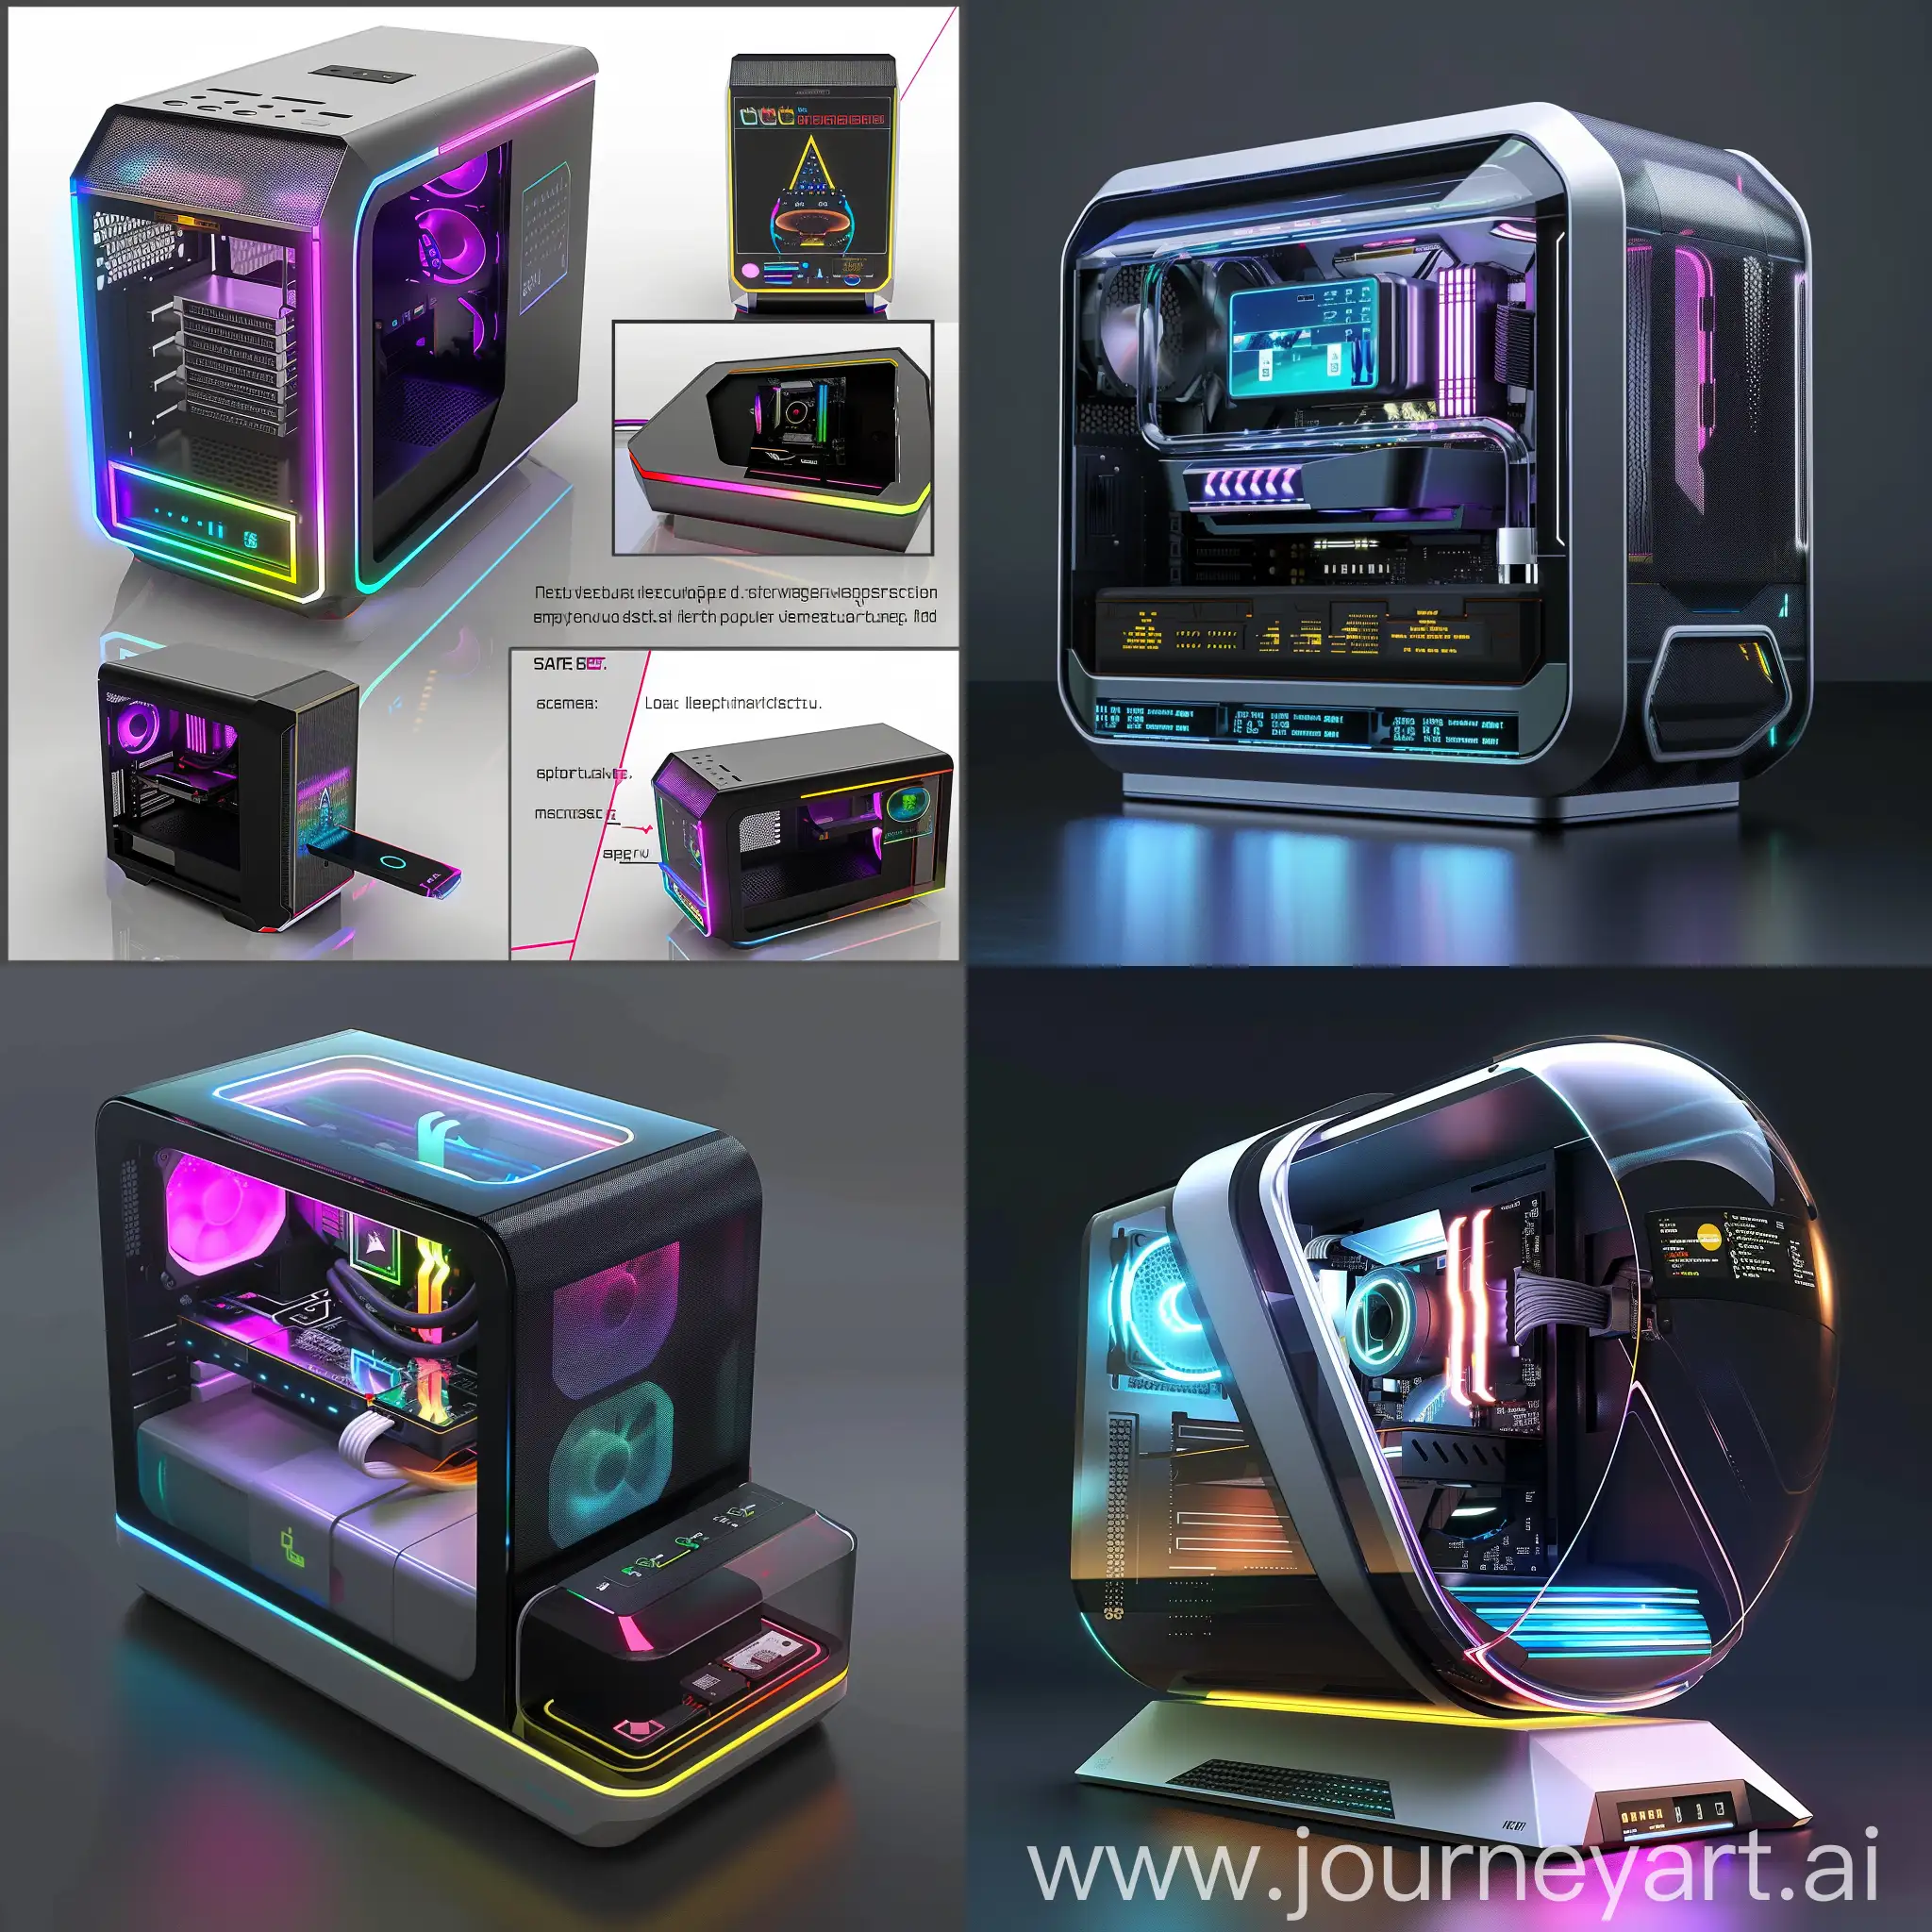 Futuristic PC case, in futuristic style, Modular Component System, Liquid Cooling System, Integrated RGB Lighting, Wireless Charging Pad, Smart Cable Management, Tool-less Drive Bays, Transparent OLED Display Panel, Biometric Security Features, AI-Powered System Optimization, Holographic Projection Interface, Sleek and Minimalist Exterior, RGB LED Accent Lighting, Touchscreen Control Panel, Motorized Retractable Ports, Augmented Reality Display, Integrated Wireless Charging Station, Customizable 3D Printed Panels, Embedded Ambient Temperature Sensors, Smart Voice Assistant Integration, Holographic Projection Display, Carbon Fiber Chassis, Low-profile CPU Cooler, SFF (Small Form Factor) Motherboard, M.2 SSD Storage, Low-power Components, Integrated Power Supply Unit (PSU), Passive Cooling Solutions, Customizable Component Layout, Low-profile RAM Modules, Efficient Cable Management, Aluminum Alloy Construction, Tempered Glass Panels, Slim Profile Design, Tool-less Access Panels, Hidden Cable Management Channels, Integrated Carrying Handles, Ventilation Grilles with Mesh Design, Customizable Accent Lighting, Retractable I/O Ports Panel, Modular Expansion Slots, unreal engine 5 --stylize 1000